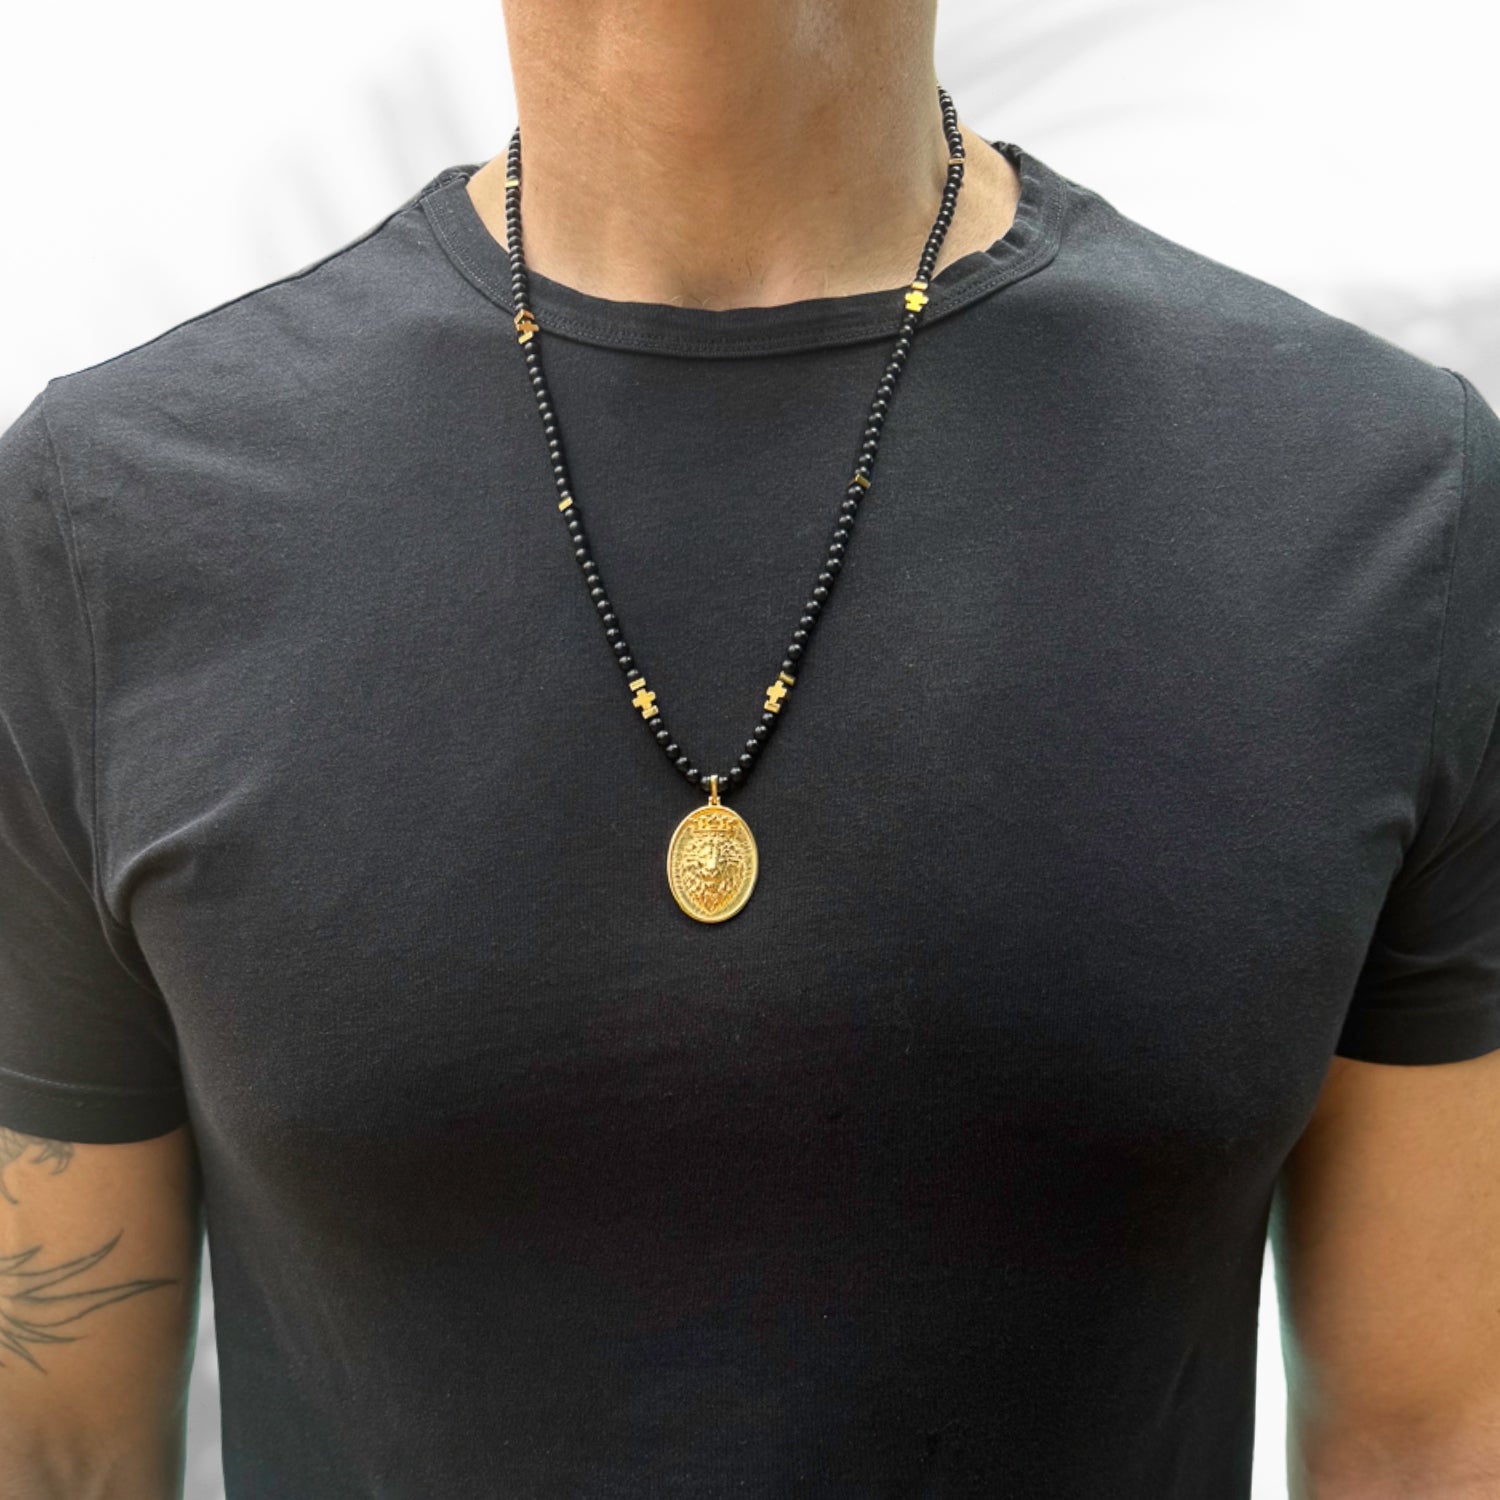 Handcrafted men's necklace with protective black onyx beads and a 24k gold-plated lion pendant on 925 sterling silver